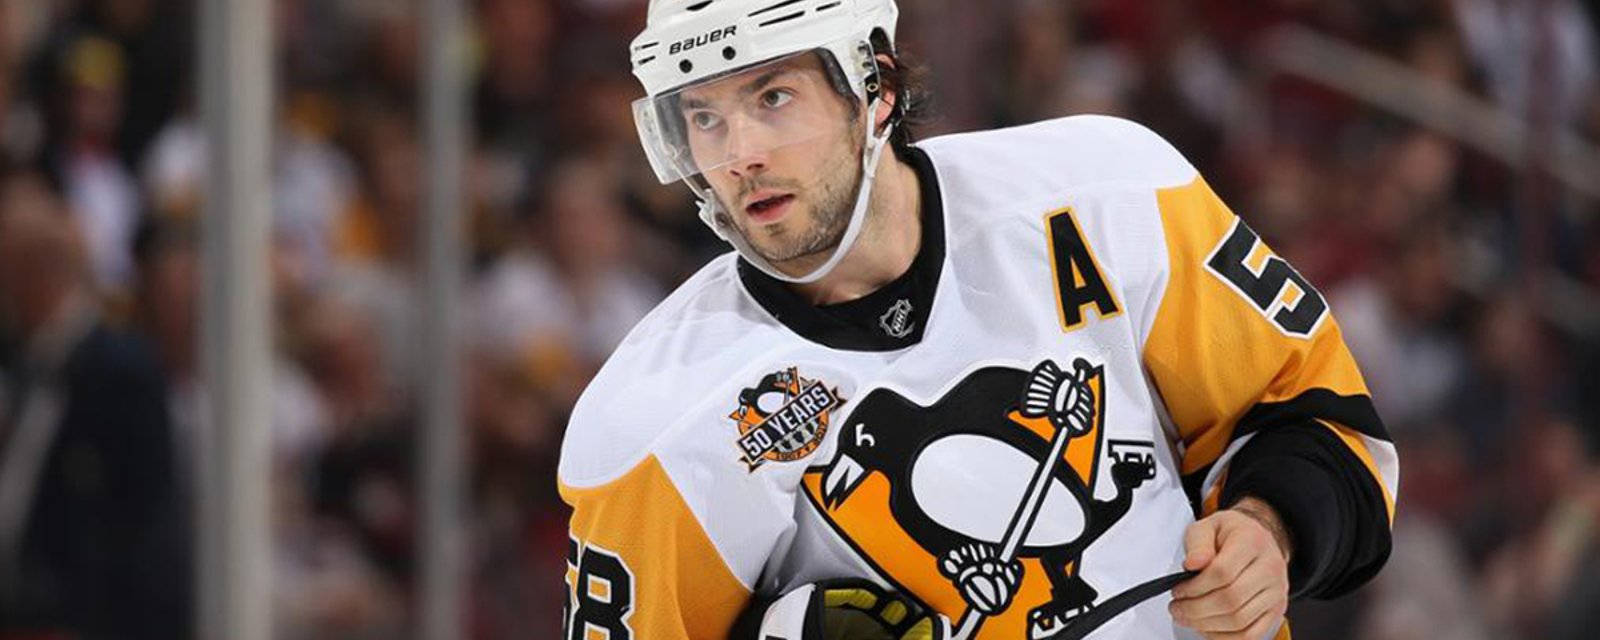 Your Call: Should the Leafs trade for Letang?